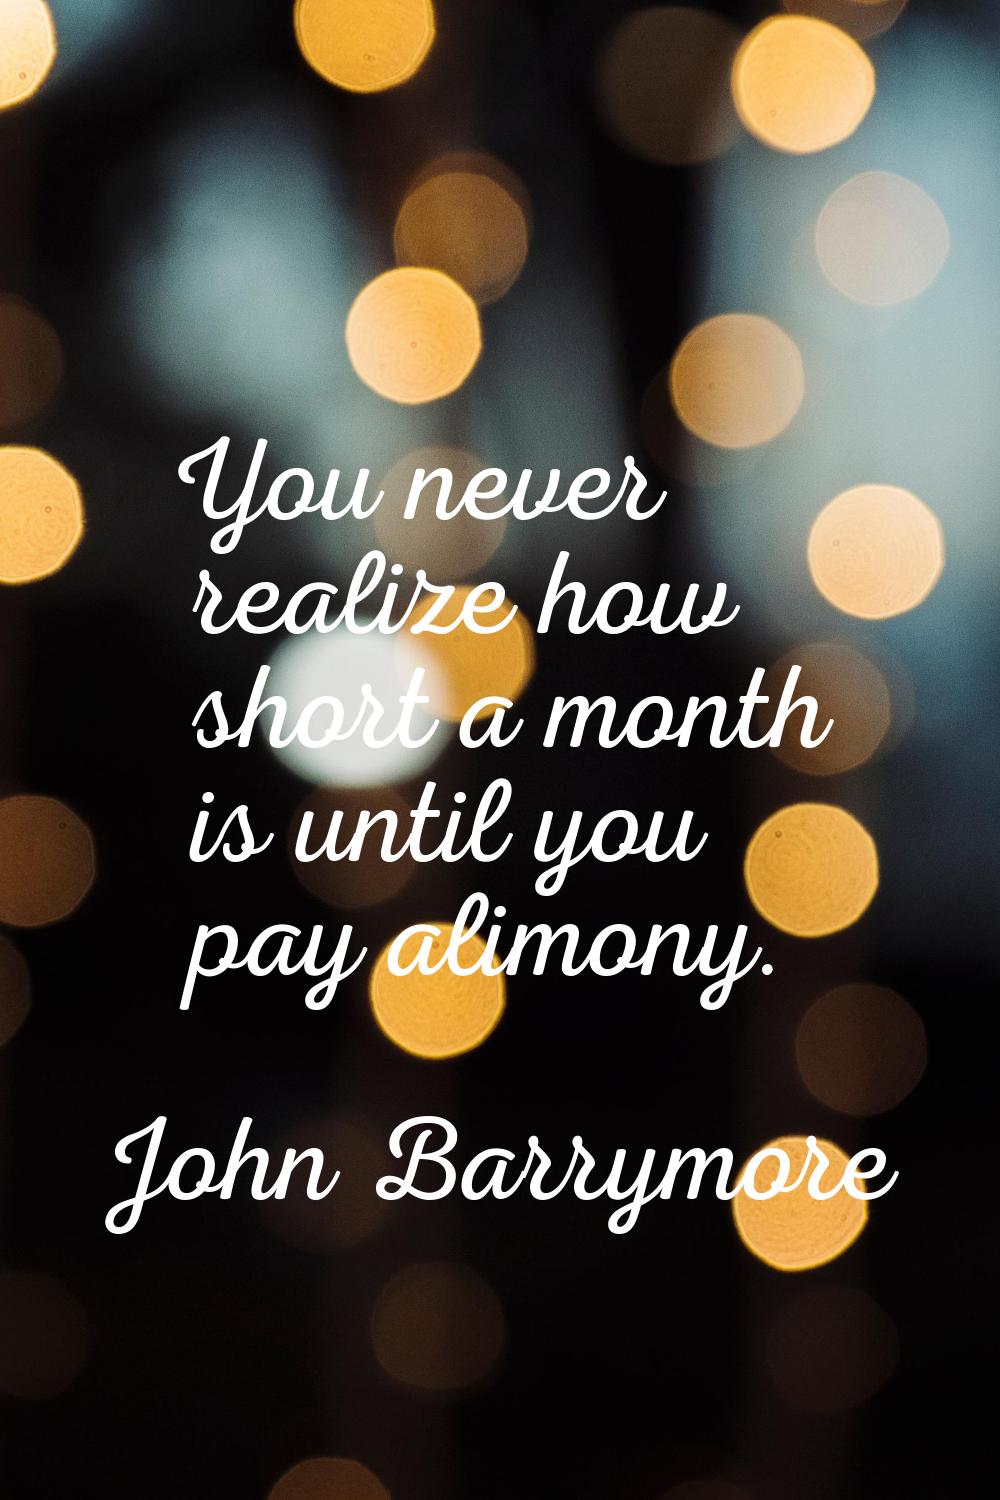 You never realize how short a month is until you pay alimony.